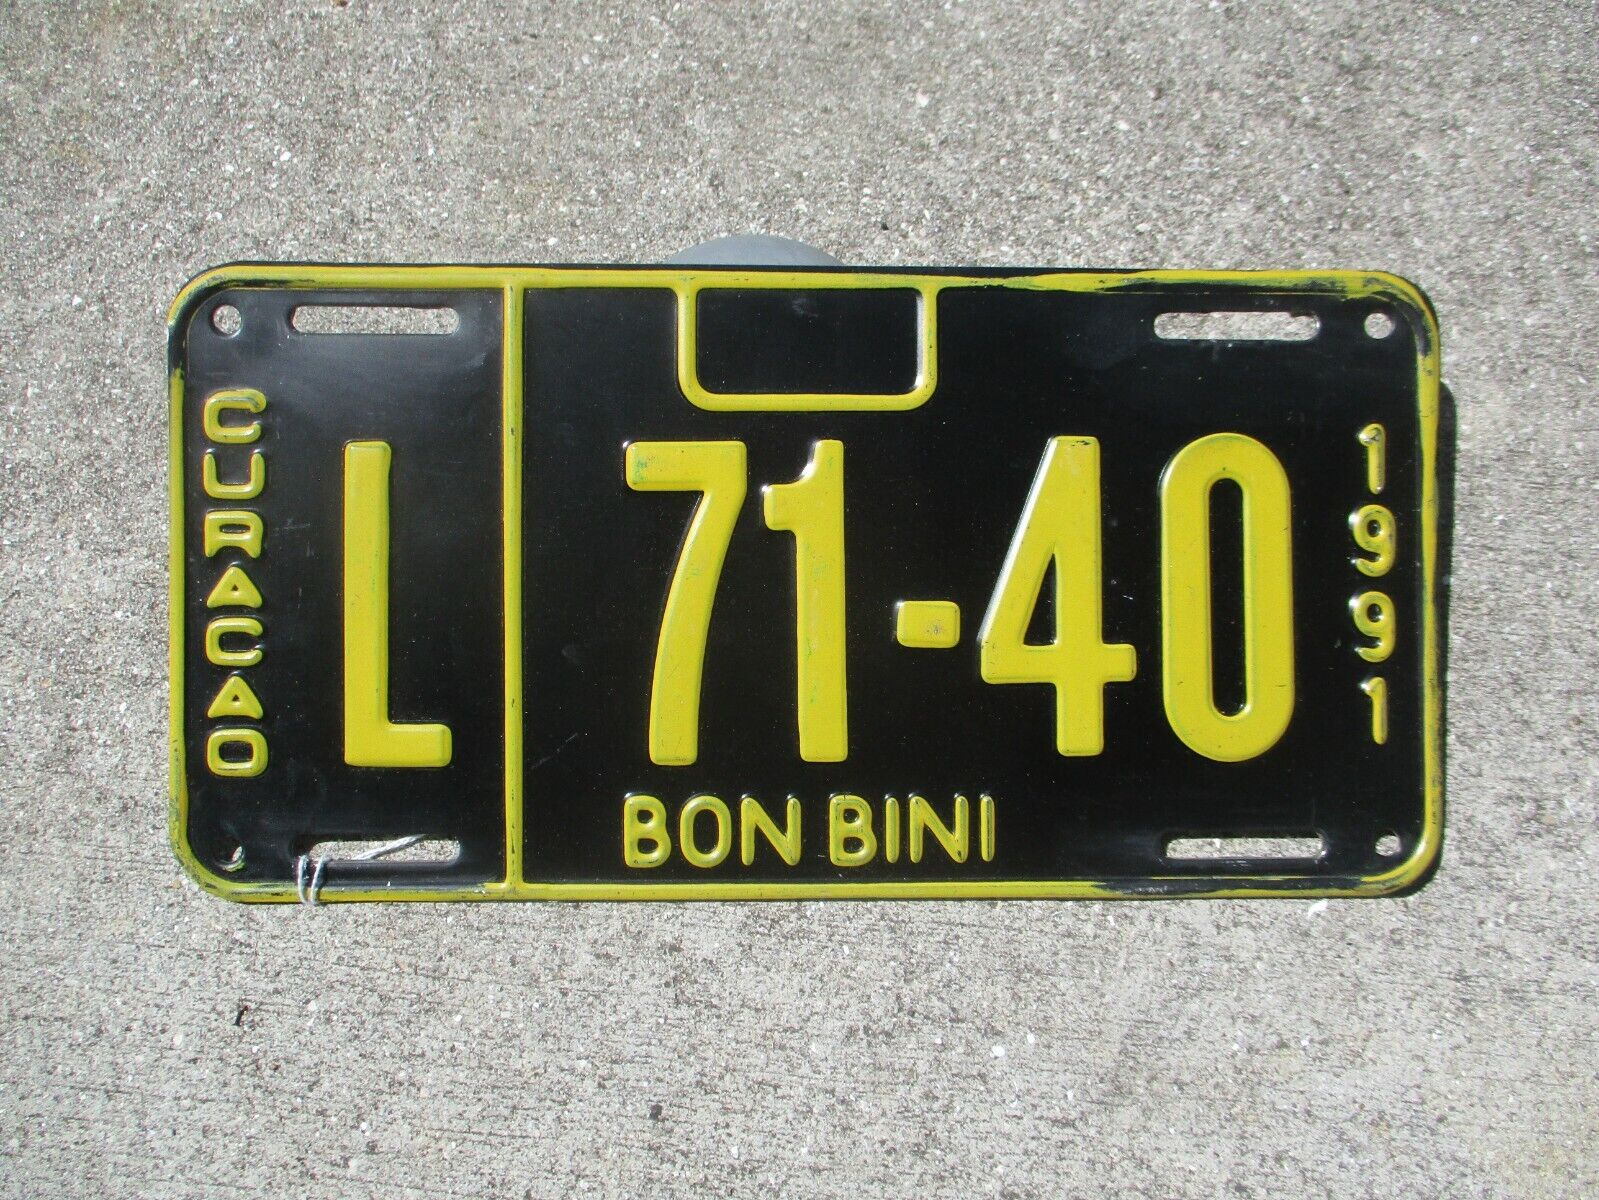 Curacao 1991  license plate  #   L  71 - 40